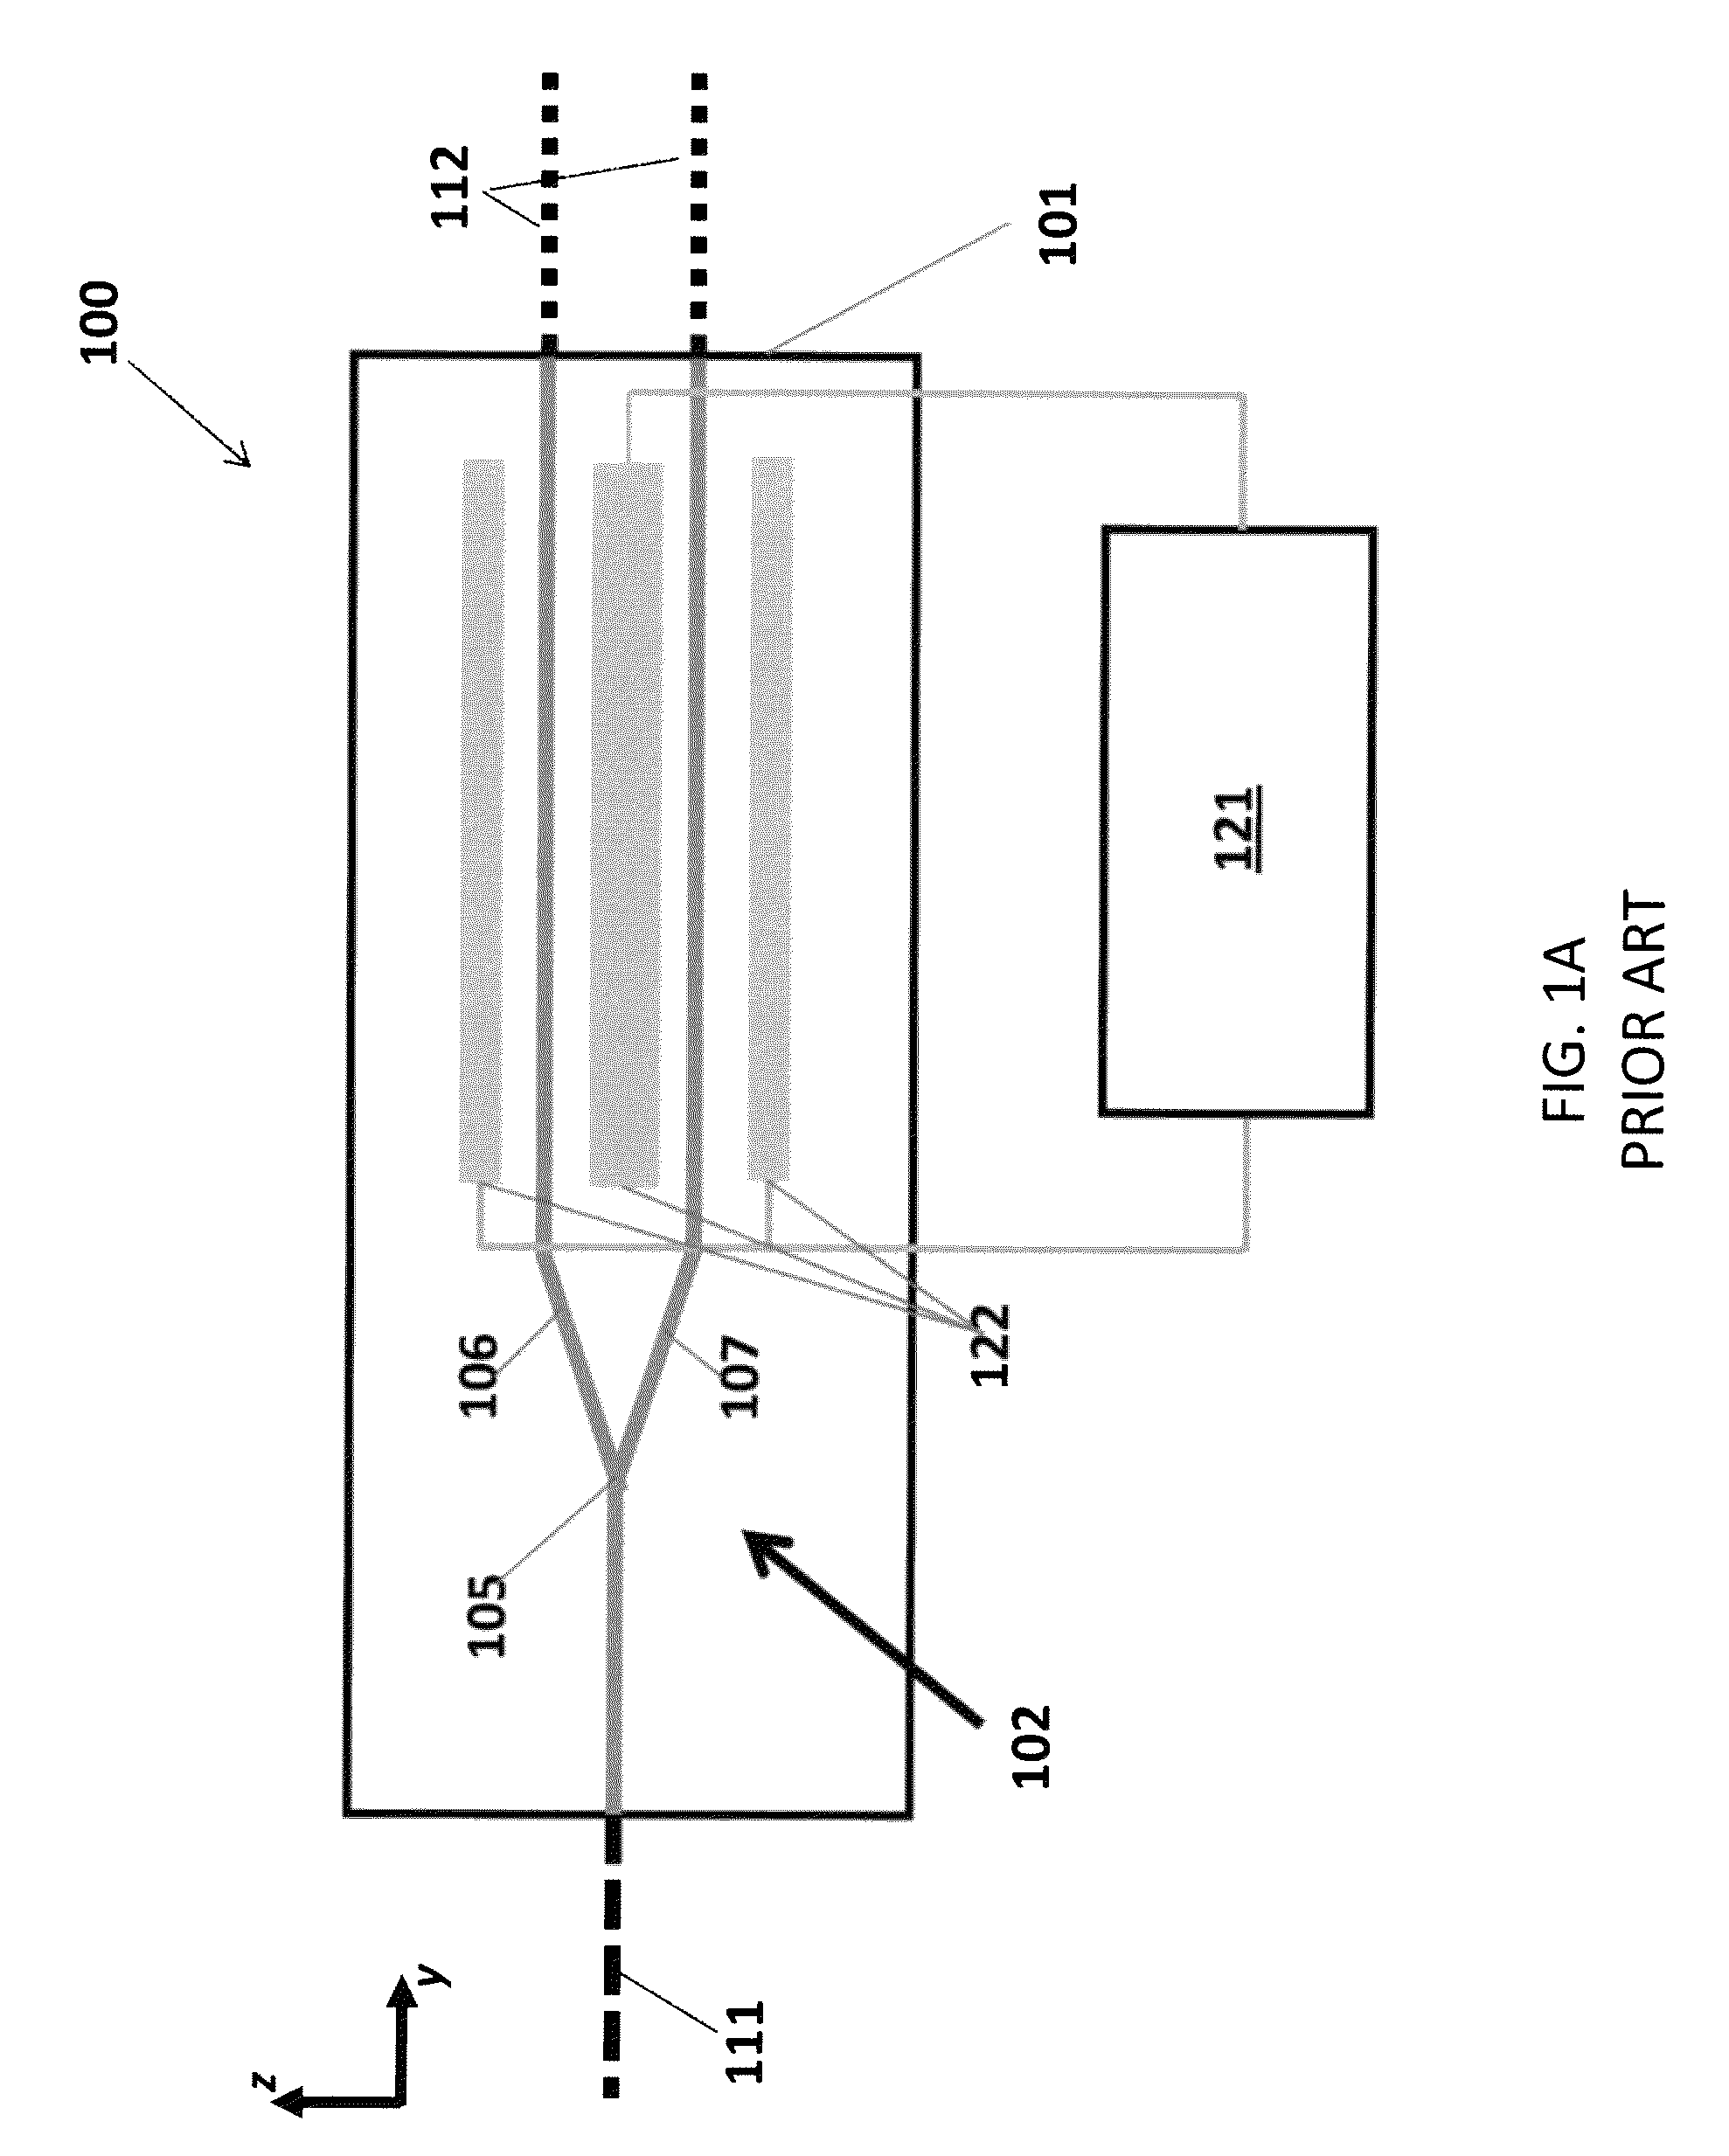 Stable lithium niobate waveguides, and methods of making and using same